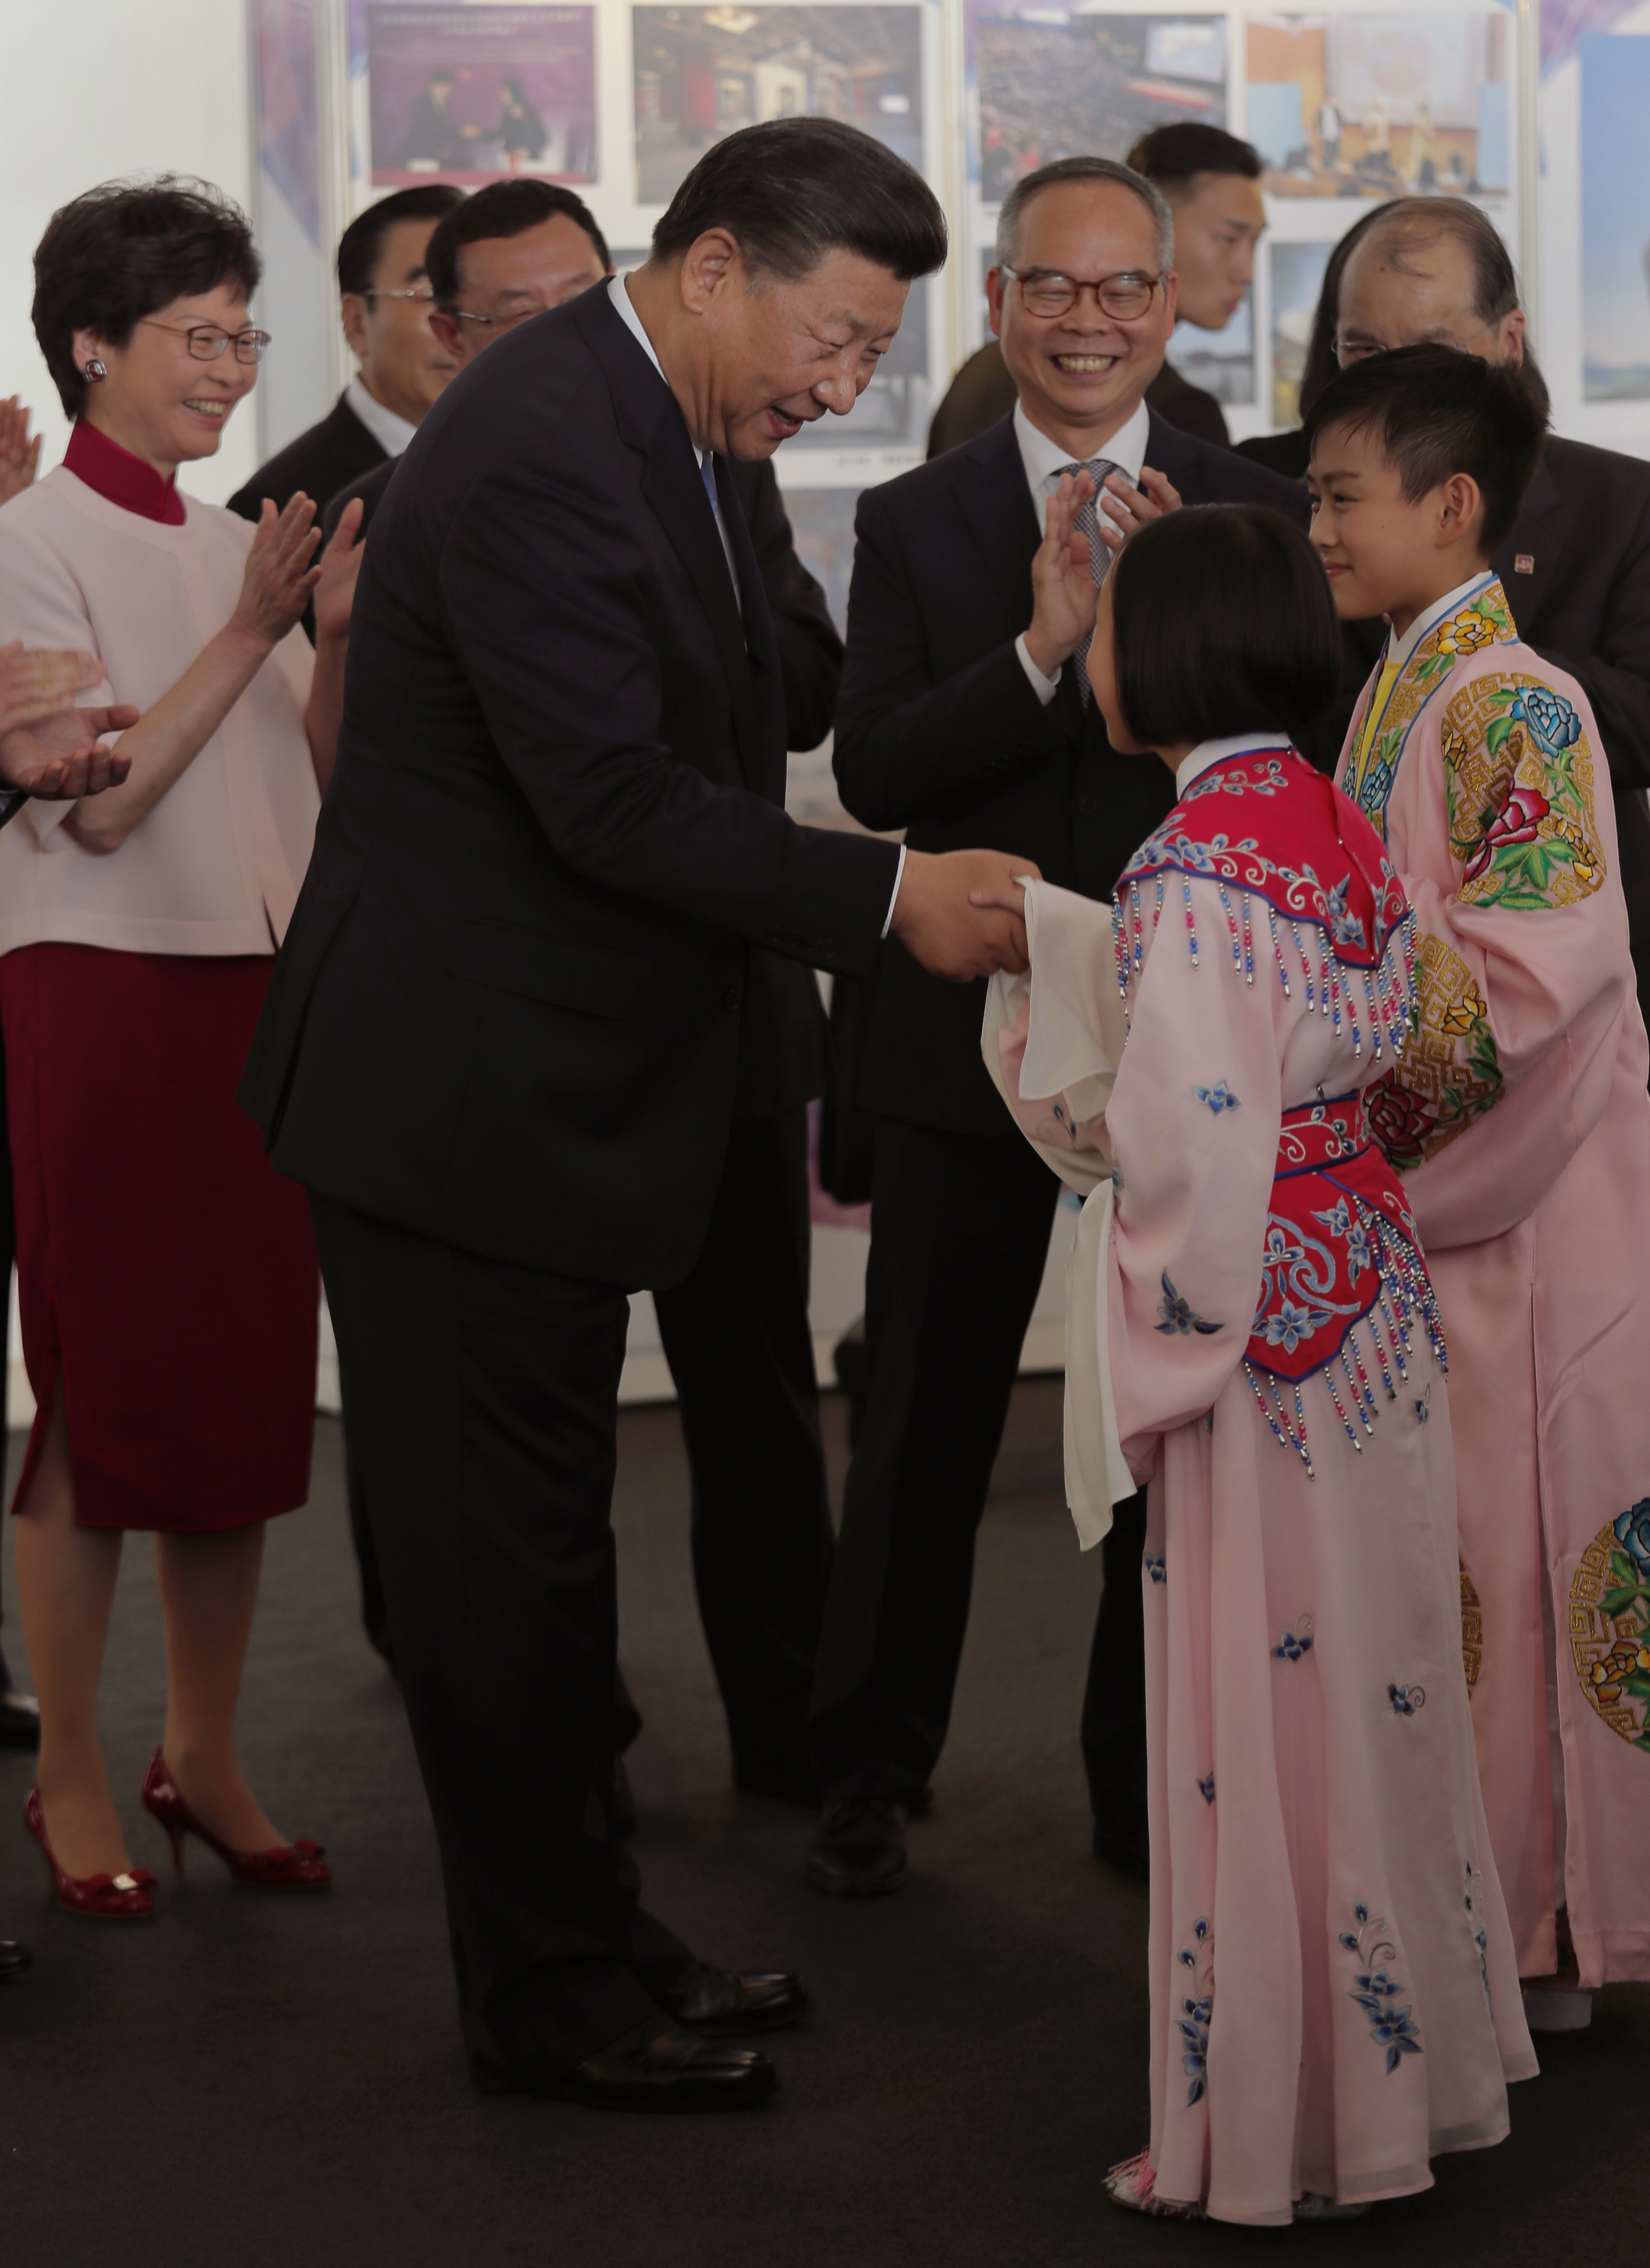 Chinese President Xi Jinping, center, shakes hands with two young Chinese opera performers as Hong Kong Chief Executive-elect Carrie Lam, left, applauds during a visit to Hong Kong's West Kowloon district Thursday, June 29, 2017, the site of a controversial high speed cross-border rail terminus. Pro-democracy supporters fear that a plan to station mainland Chinese immigration agents in the terminal to check passengers departing on trains for the mainland is an erosion of Hong Kong's 